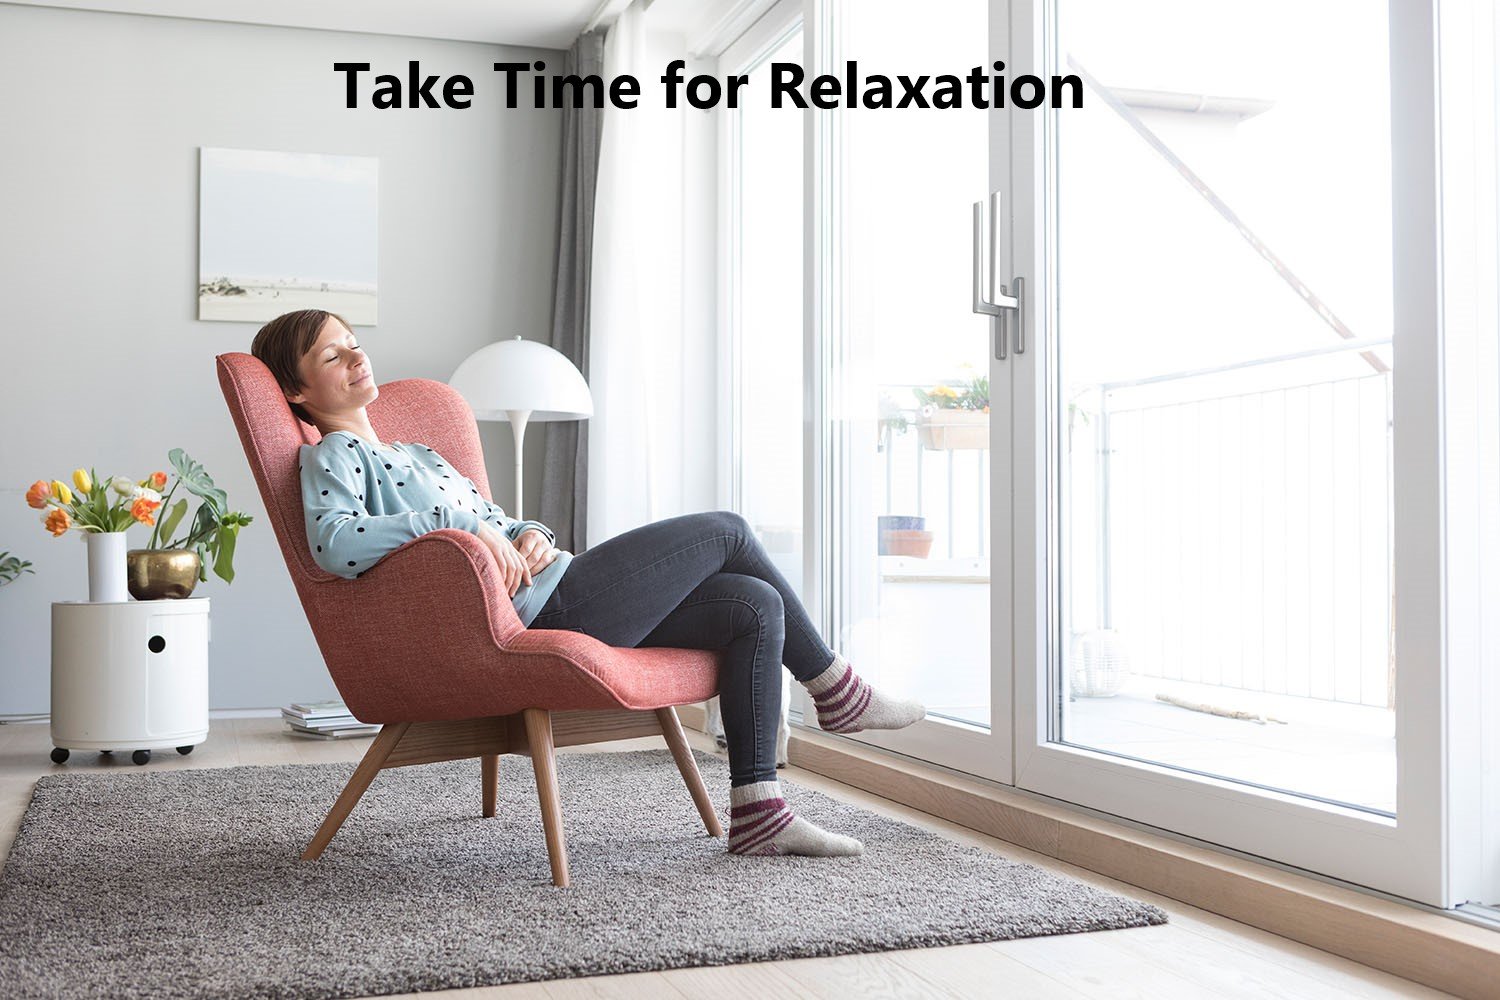 Take Time for Relaxation